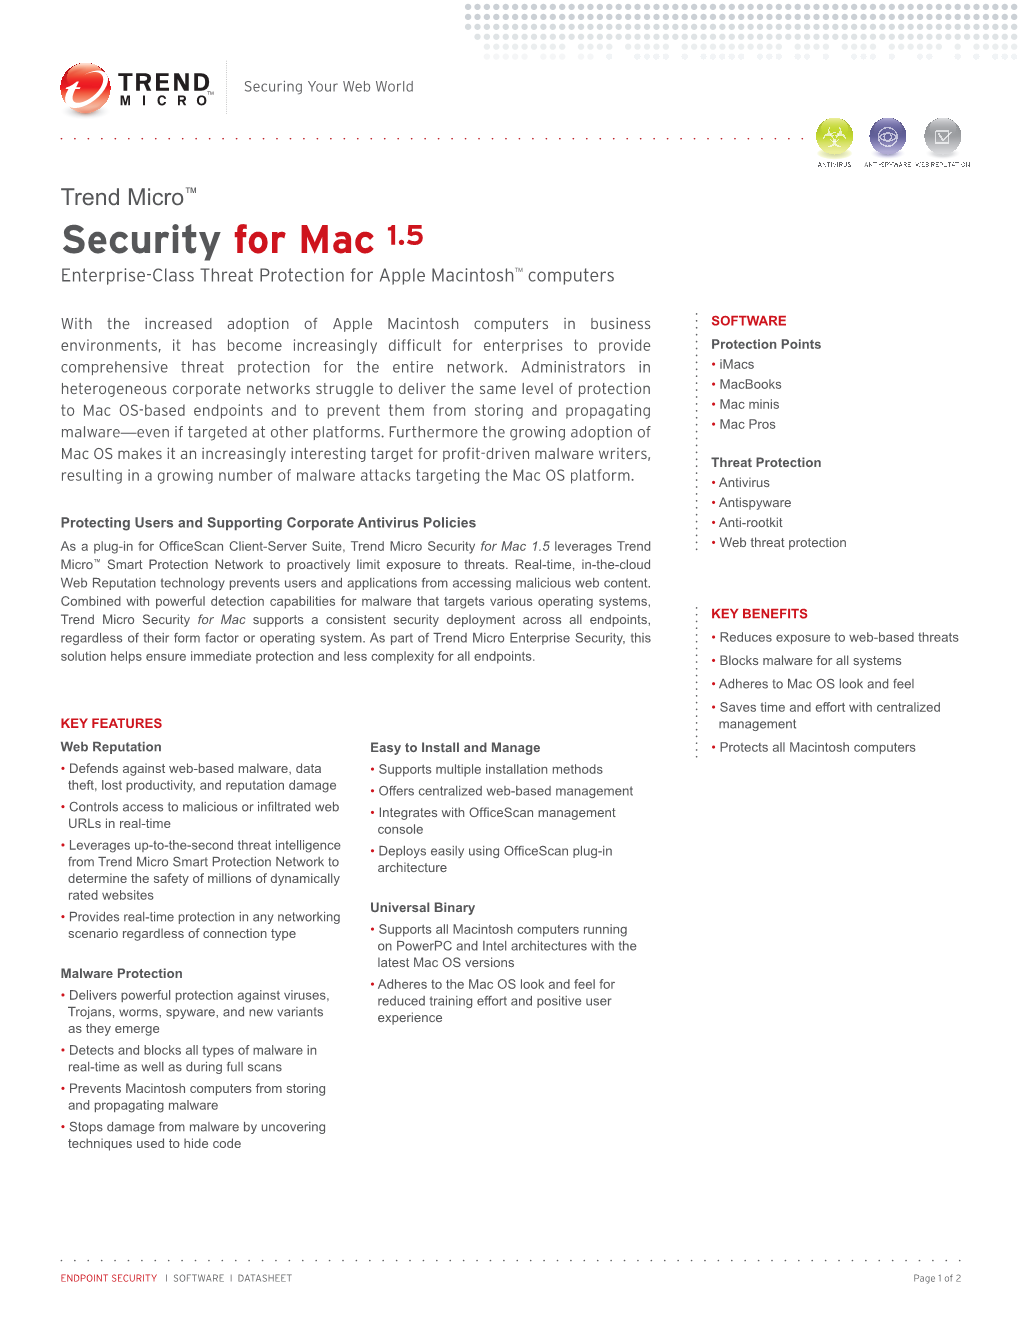 Security for Mac 1.5 Enterprise-Class Threat Protection for Apple Macintosh™ Computers